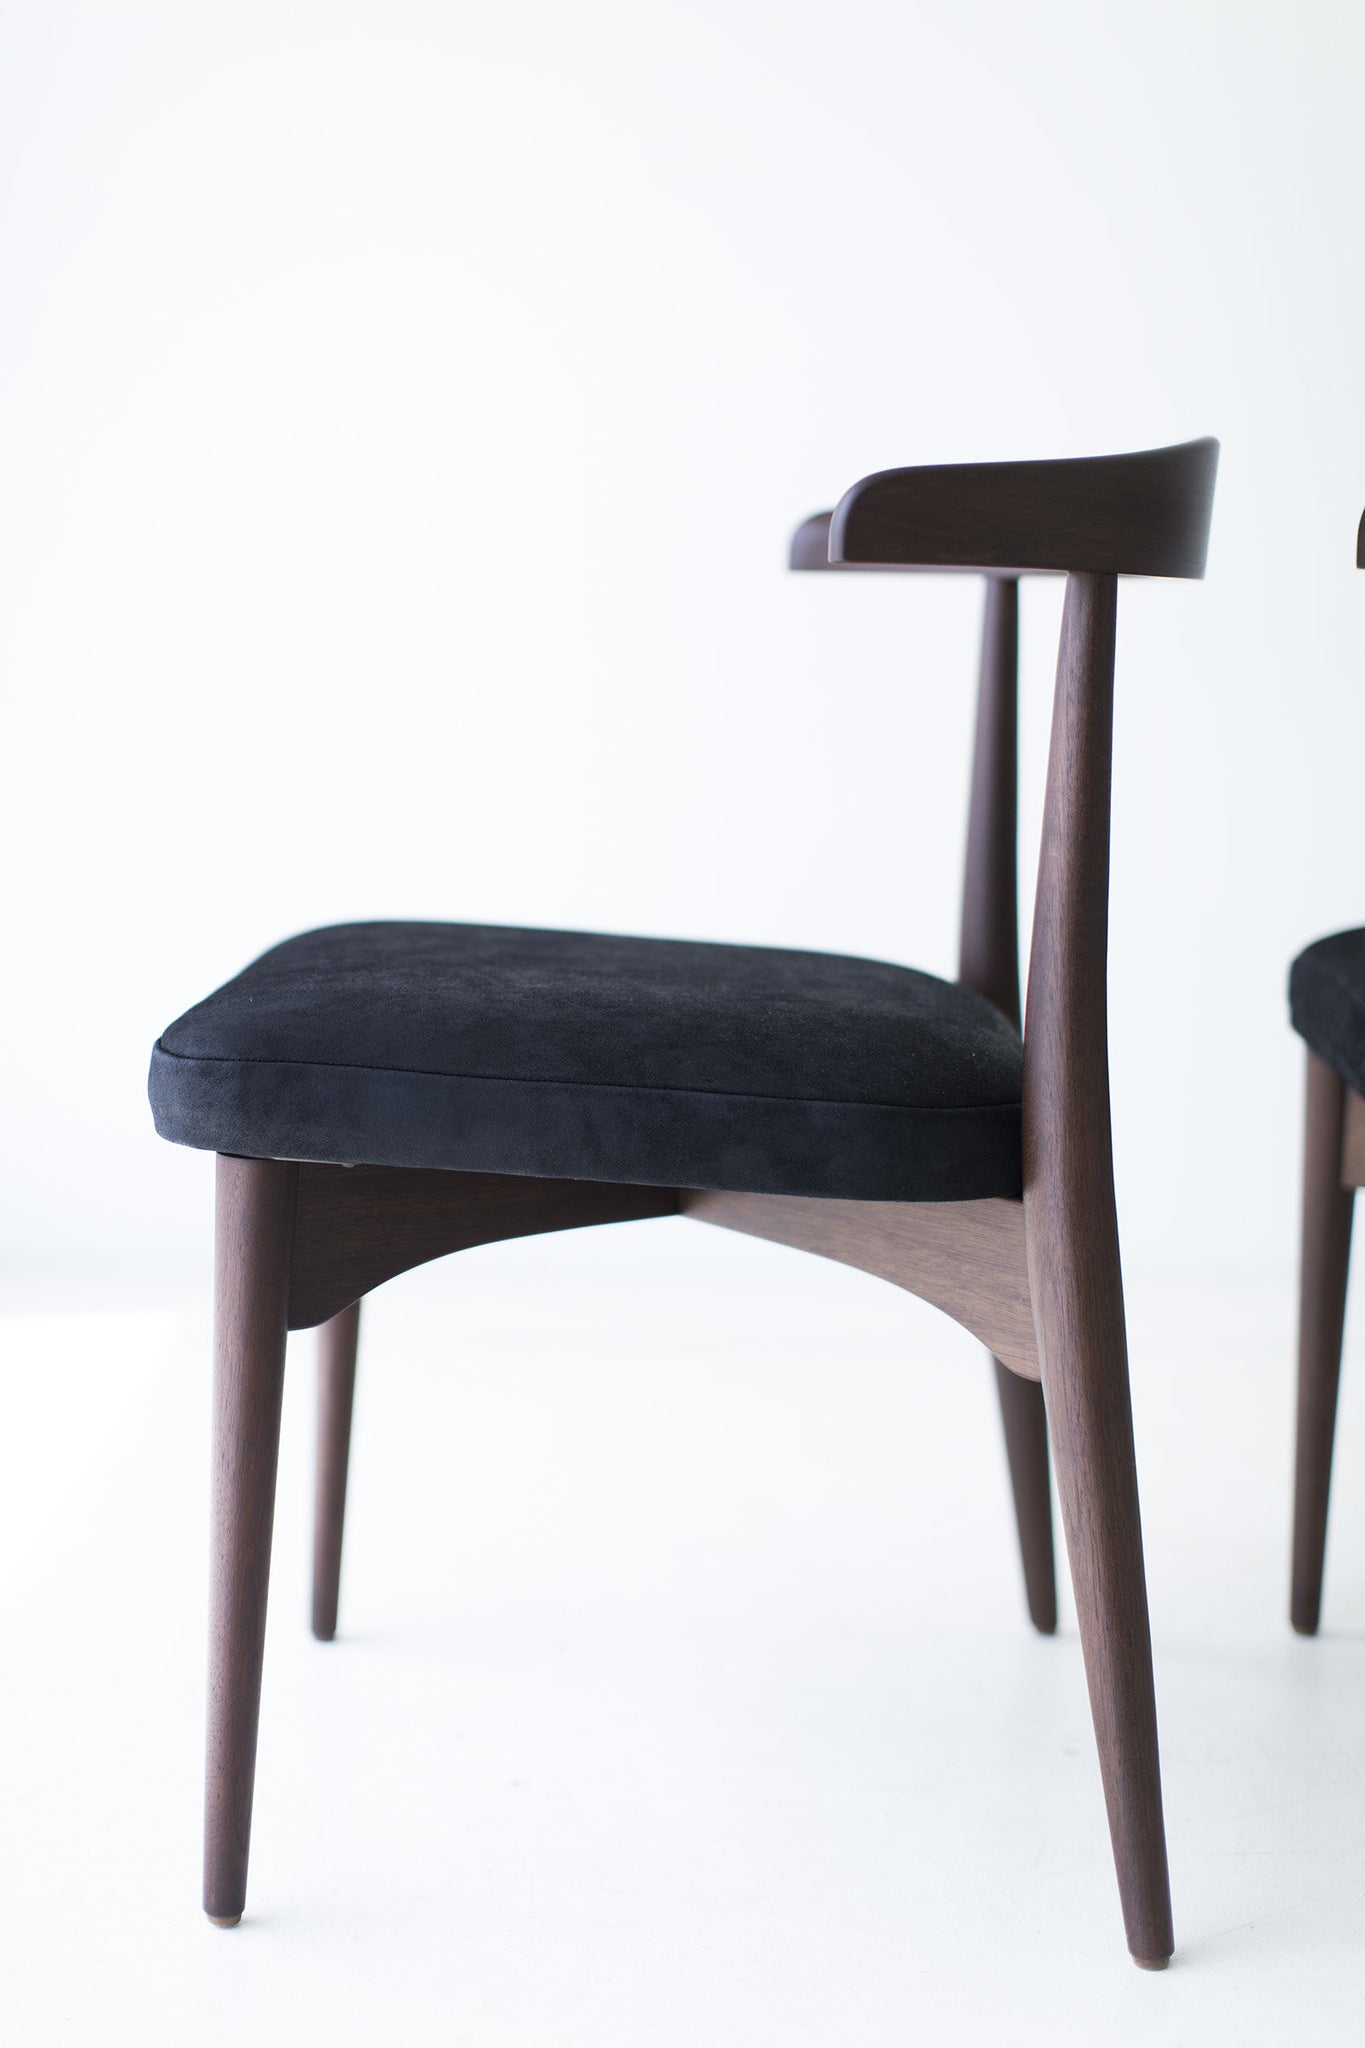 Lawrence-Peabody-Dining-Chairs-Side-P-1709-Craft-Associates-Furniture-05